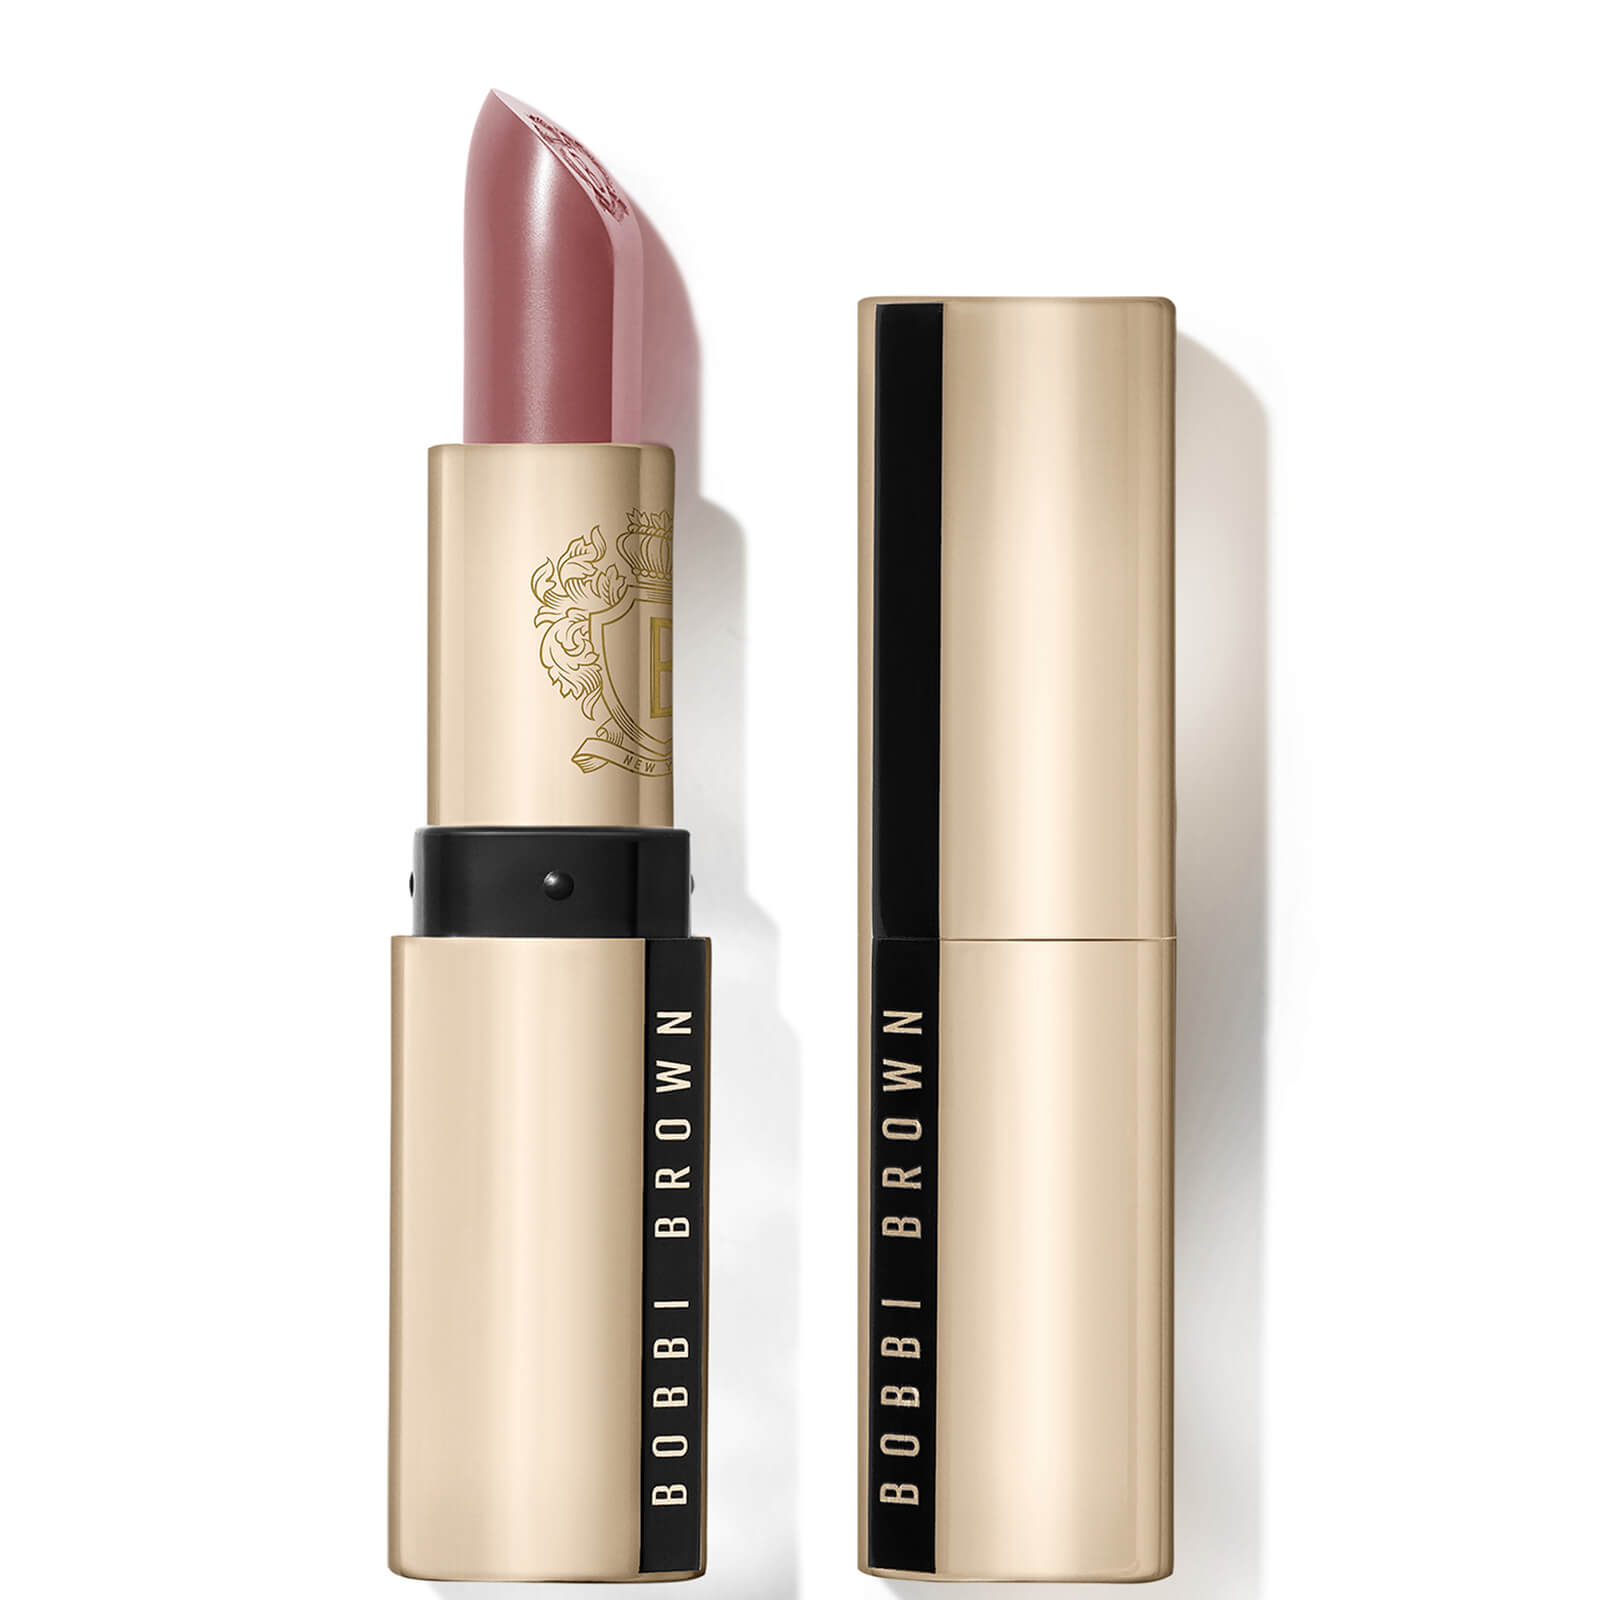 Bobbi Brown Luxe Lipstick 3.5g (Various Shades) - Toasted Honey